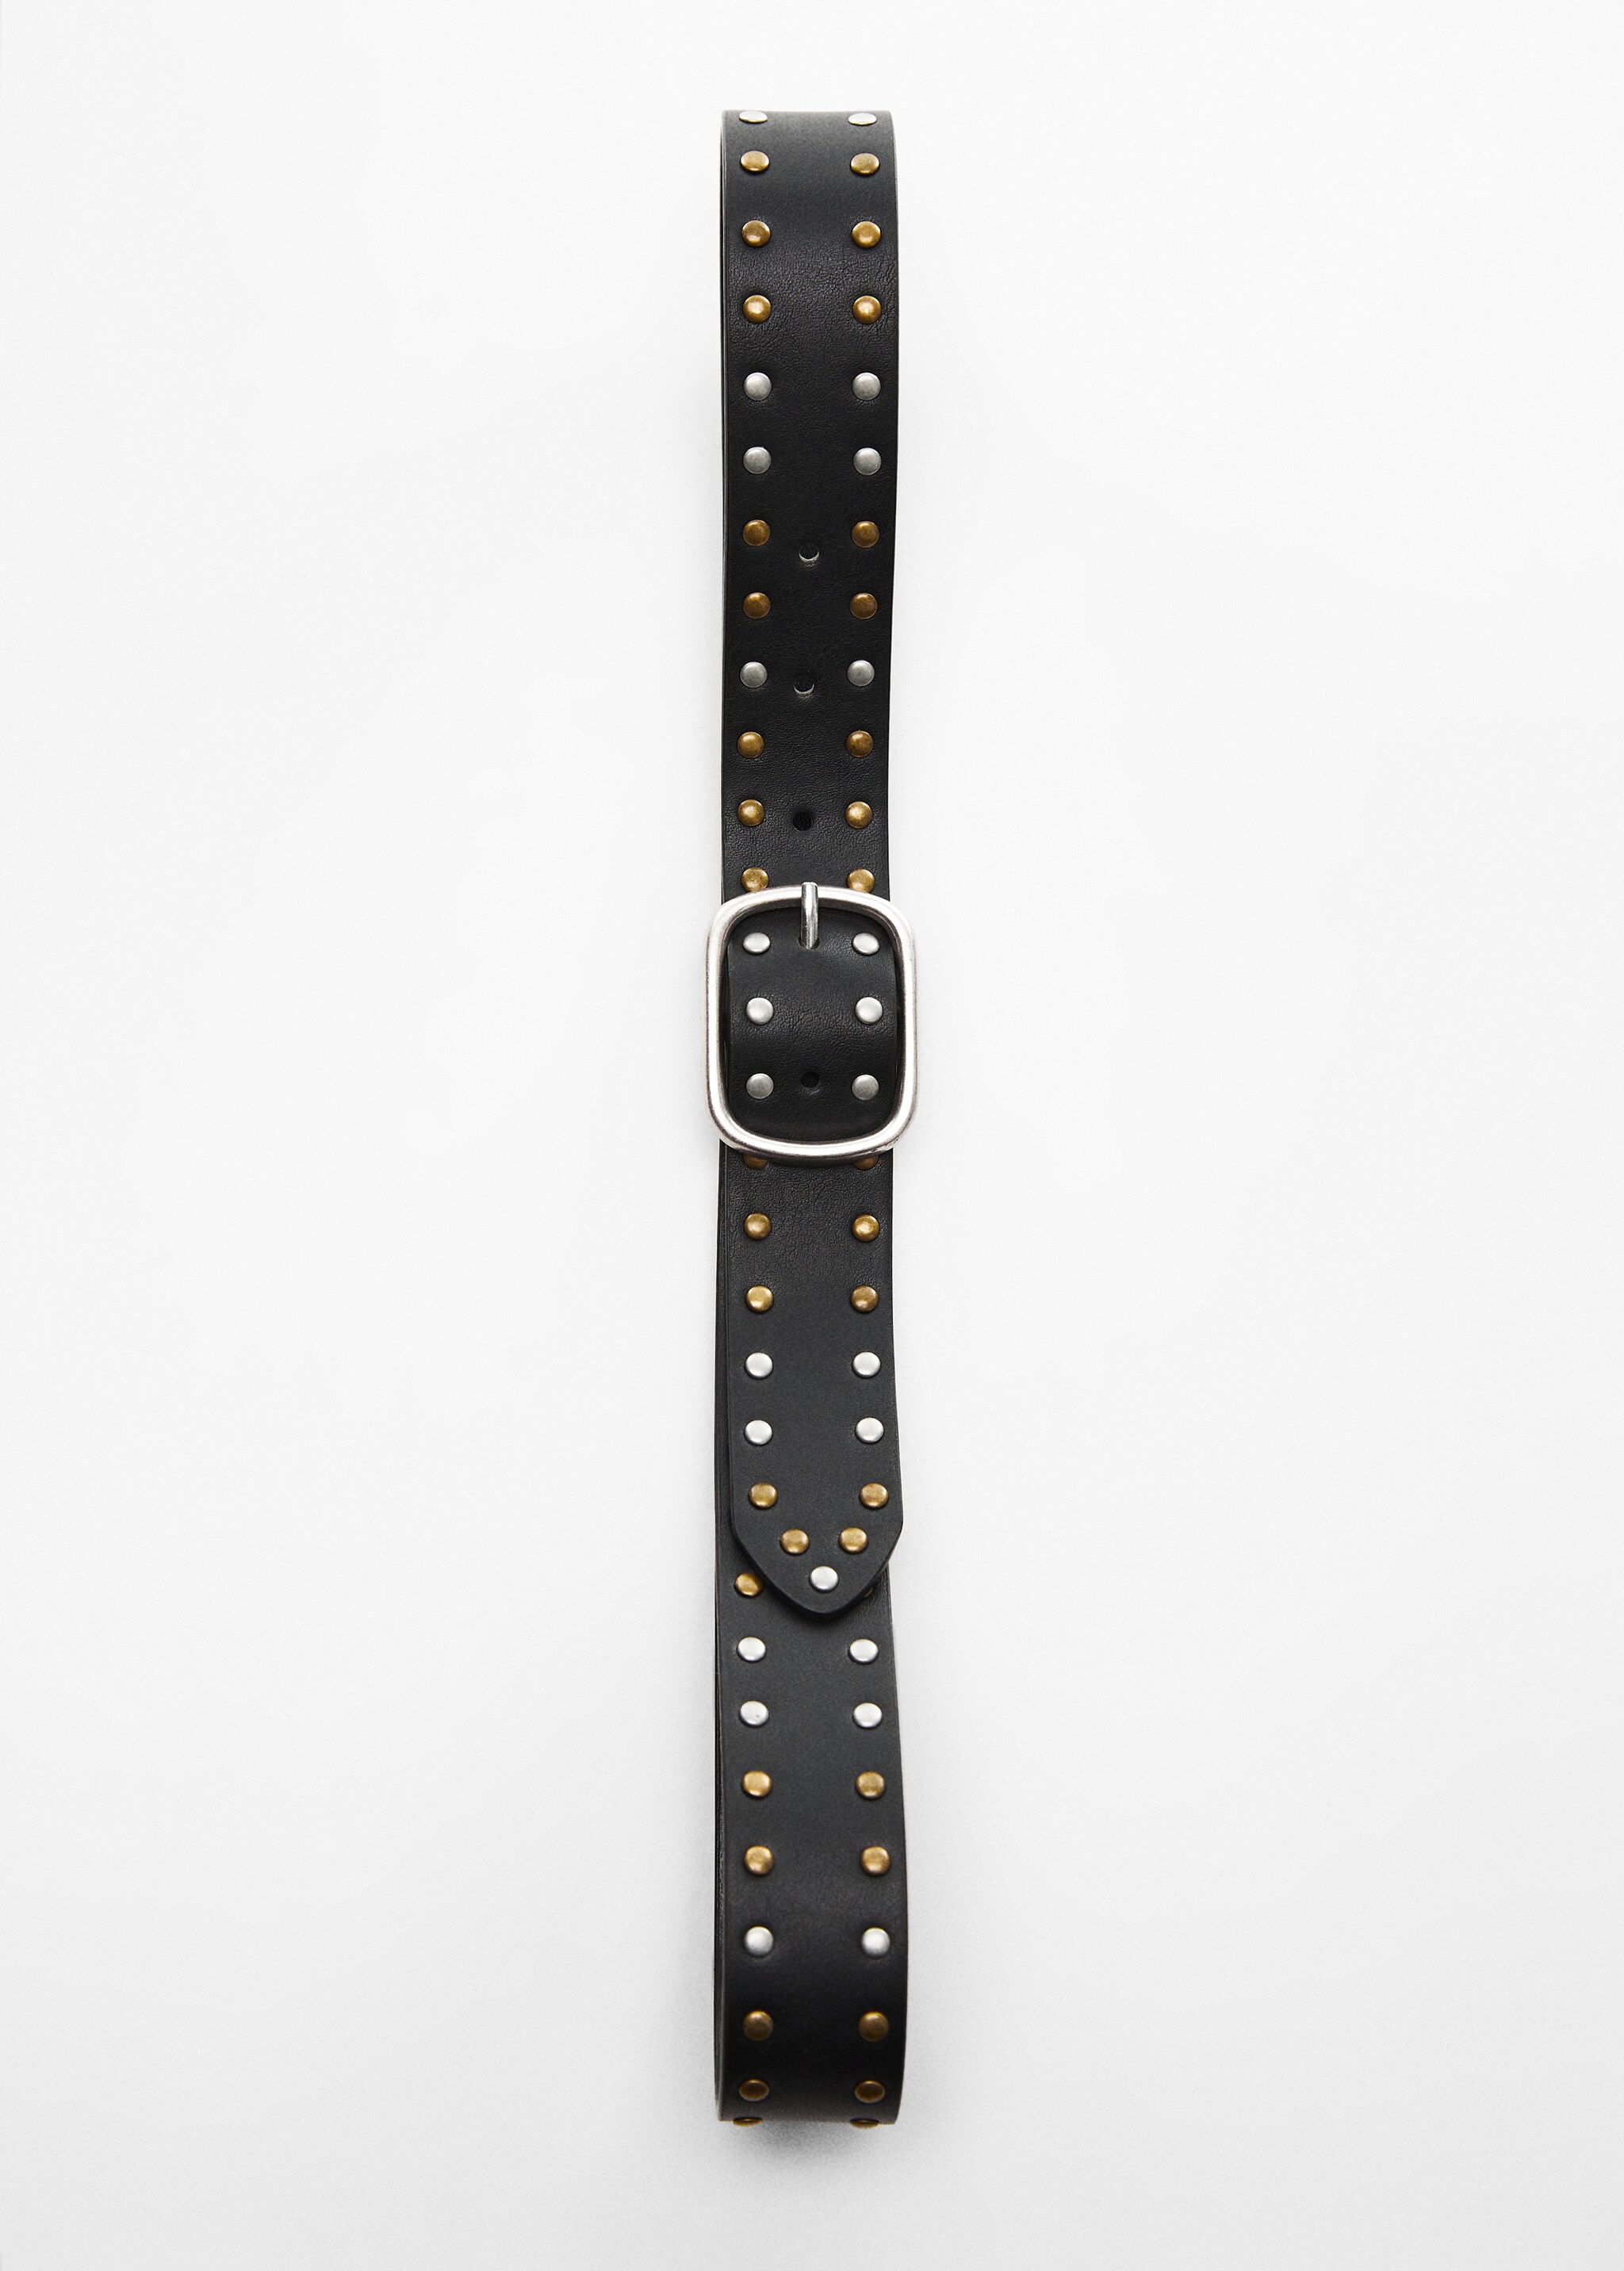 Studded belt - Details of the article 5